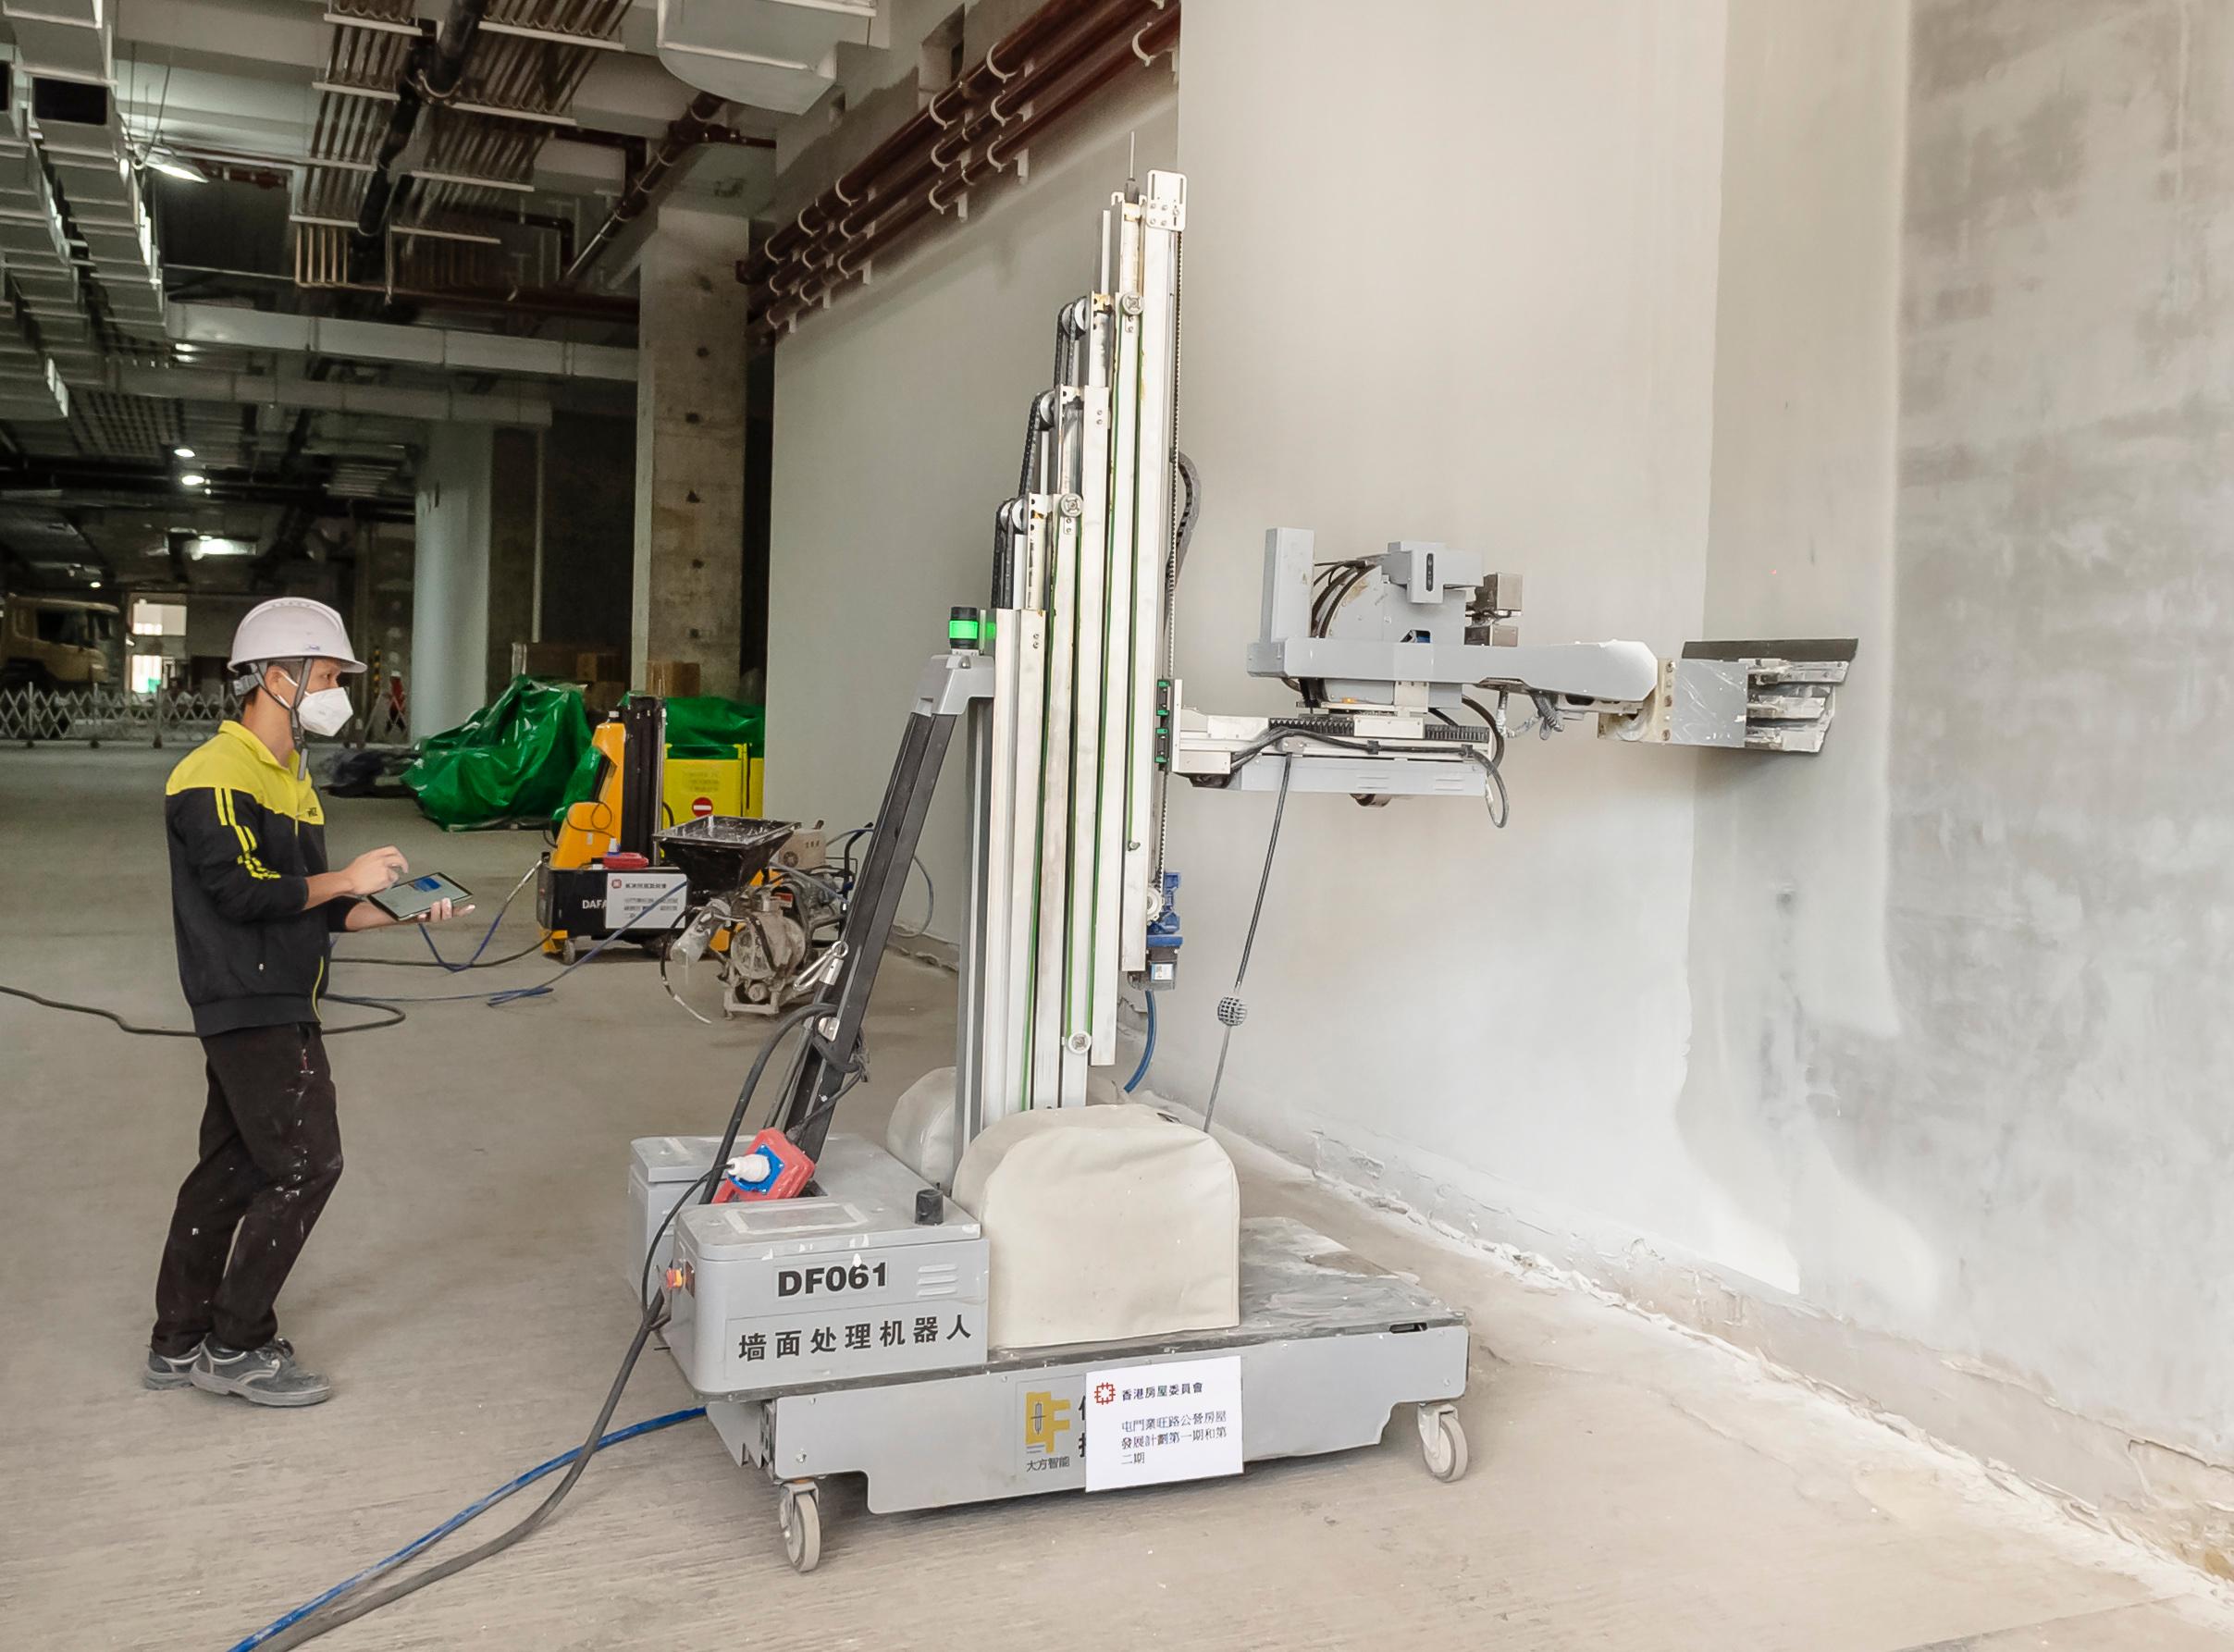 The Hong Kong Housing Authority introduced multifunctional indoor construction robot, the first of its kind, to boost safety at public housing sites. Photo shows a multifunctional indoor construction robot (larger size) performing skim coating works.